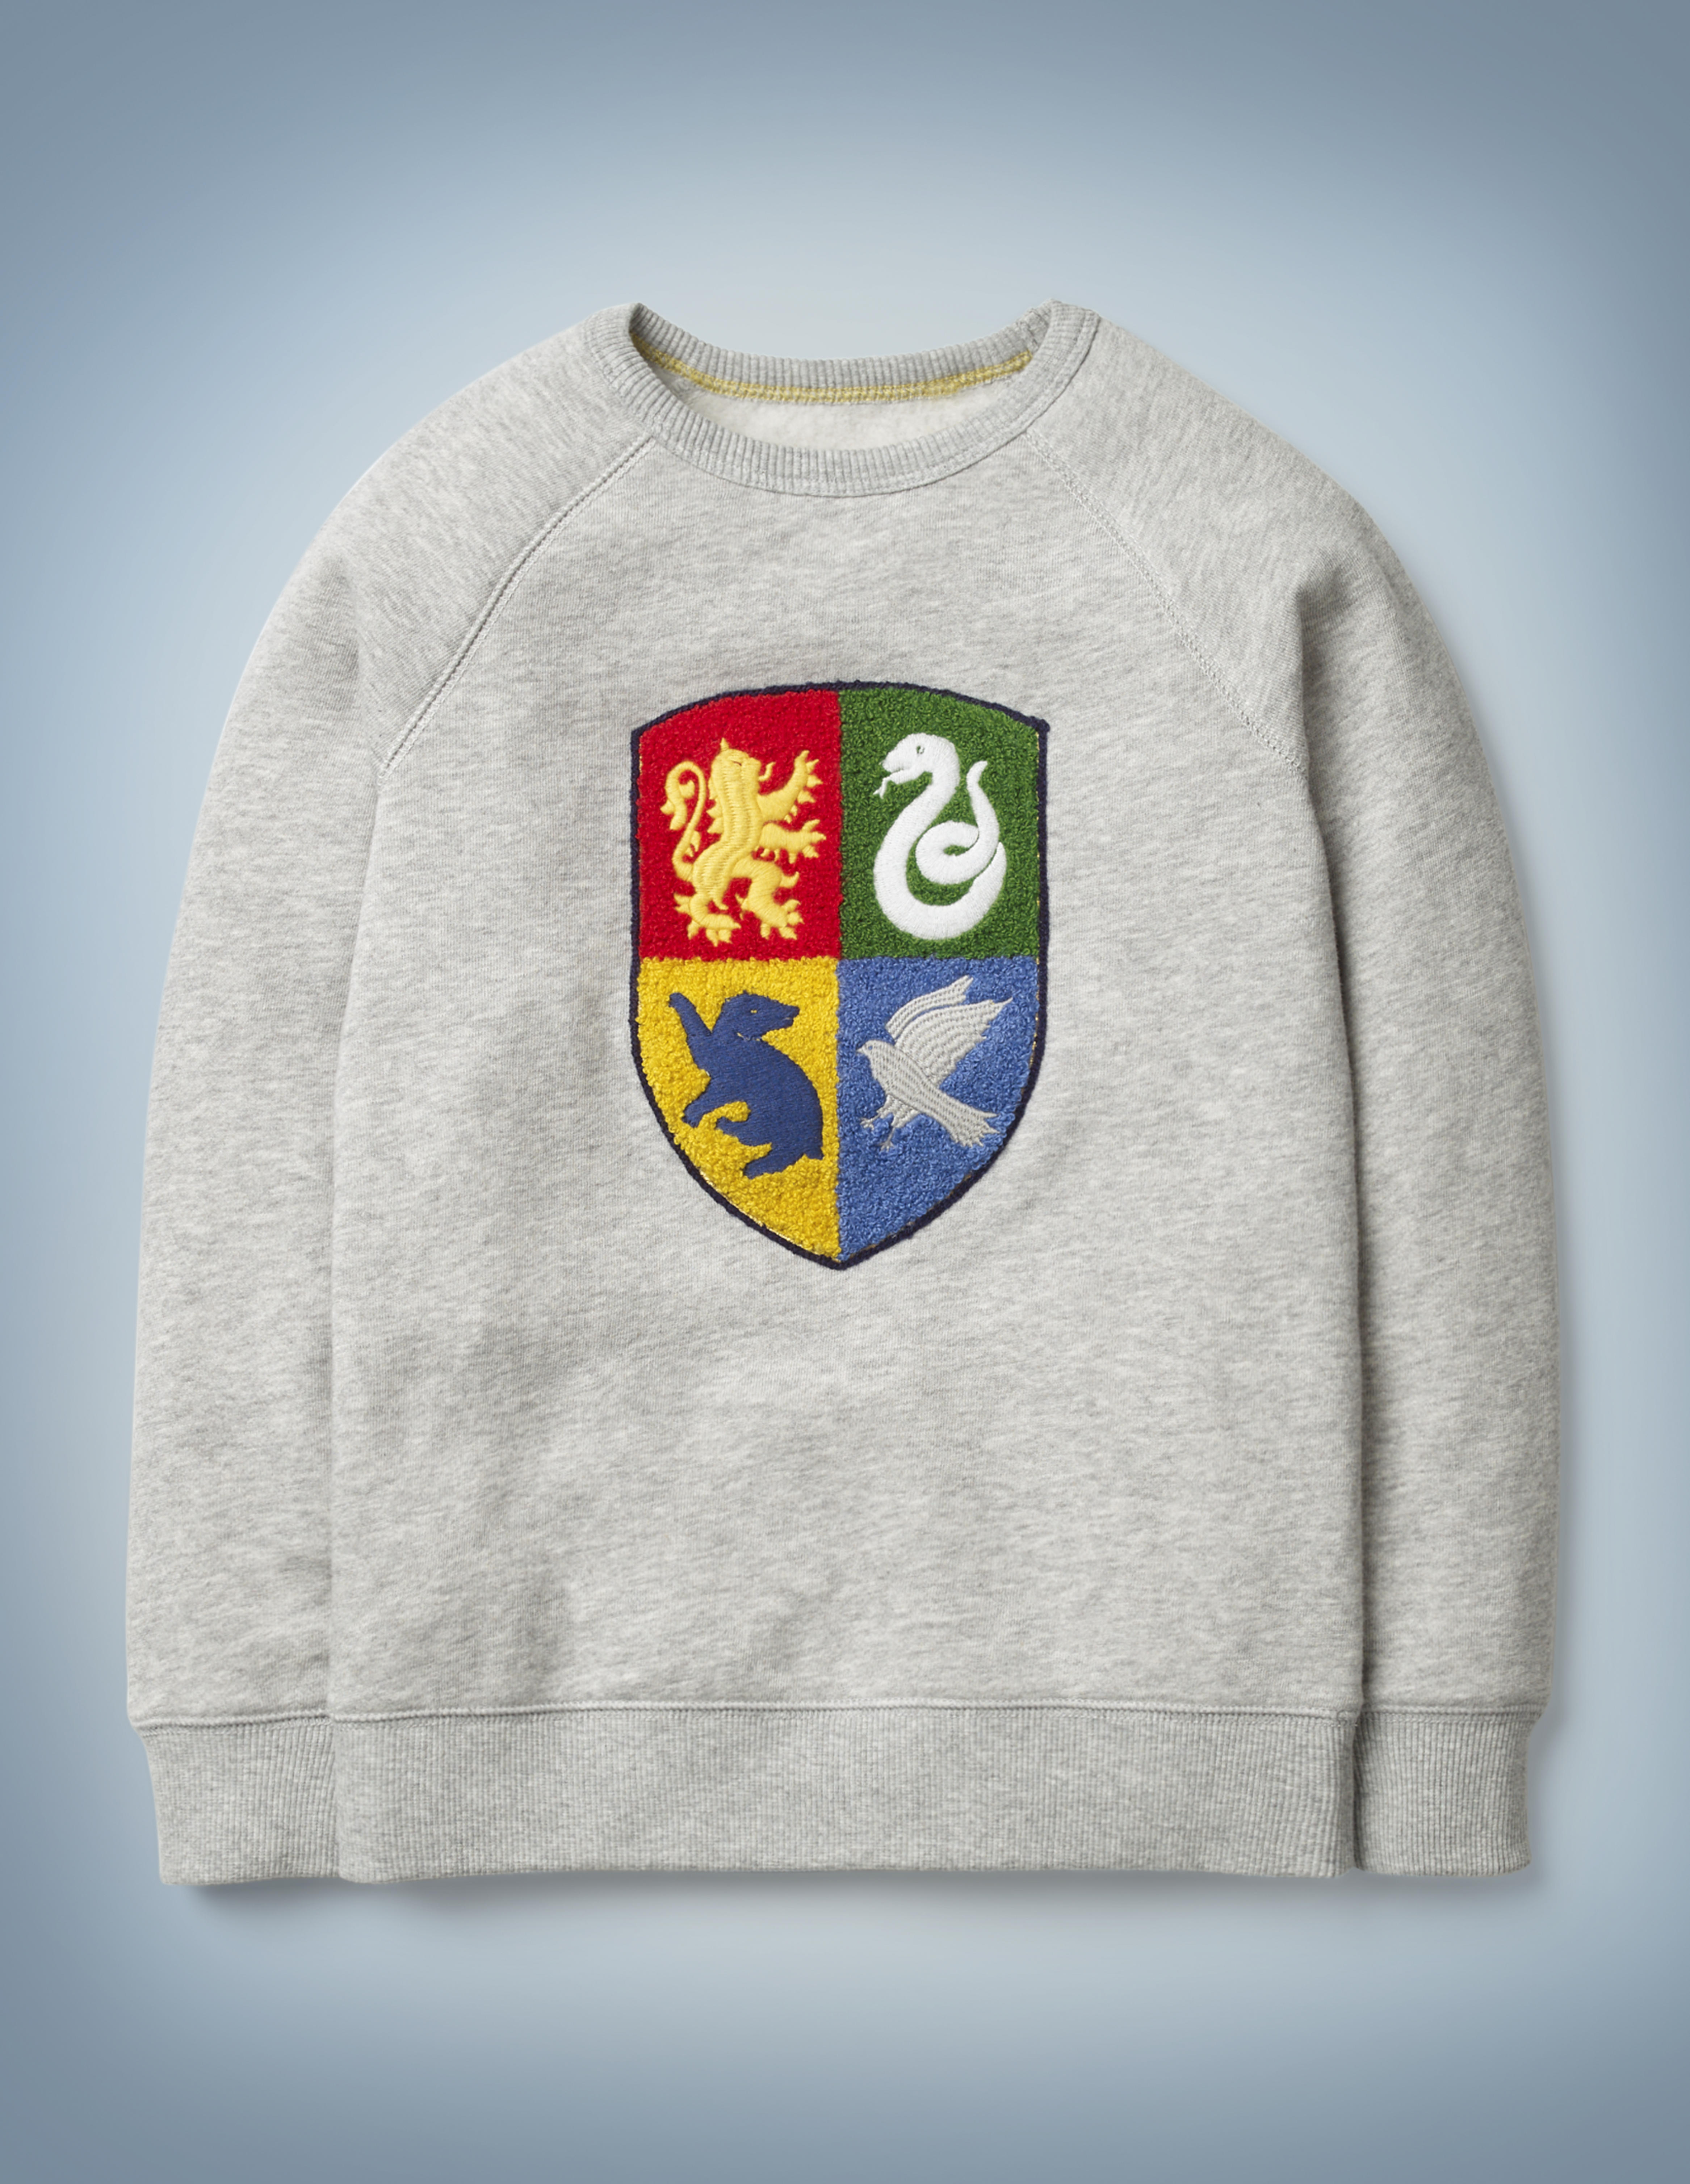 The Mini Boden Hogwarts Crest Sweatshirt in gray features a textured design showcasing the four Hogwarts House emblems. It retails at £28.